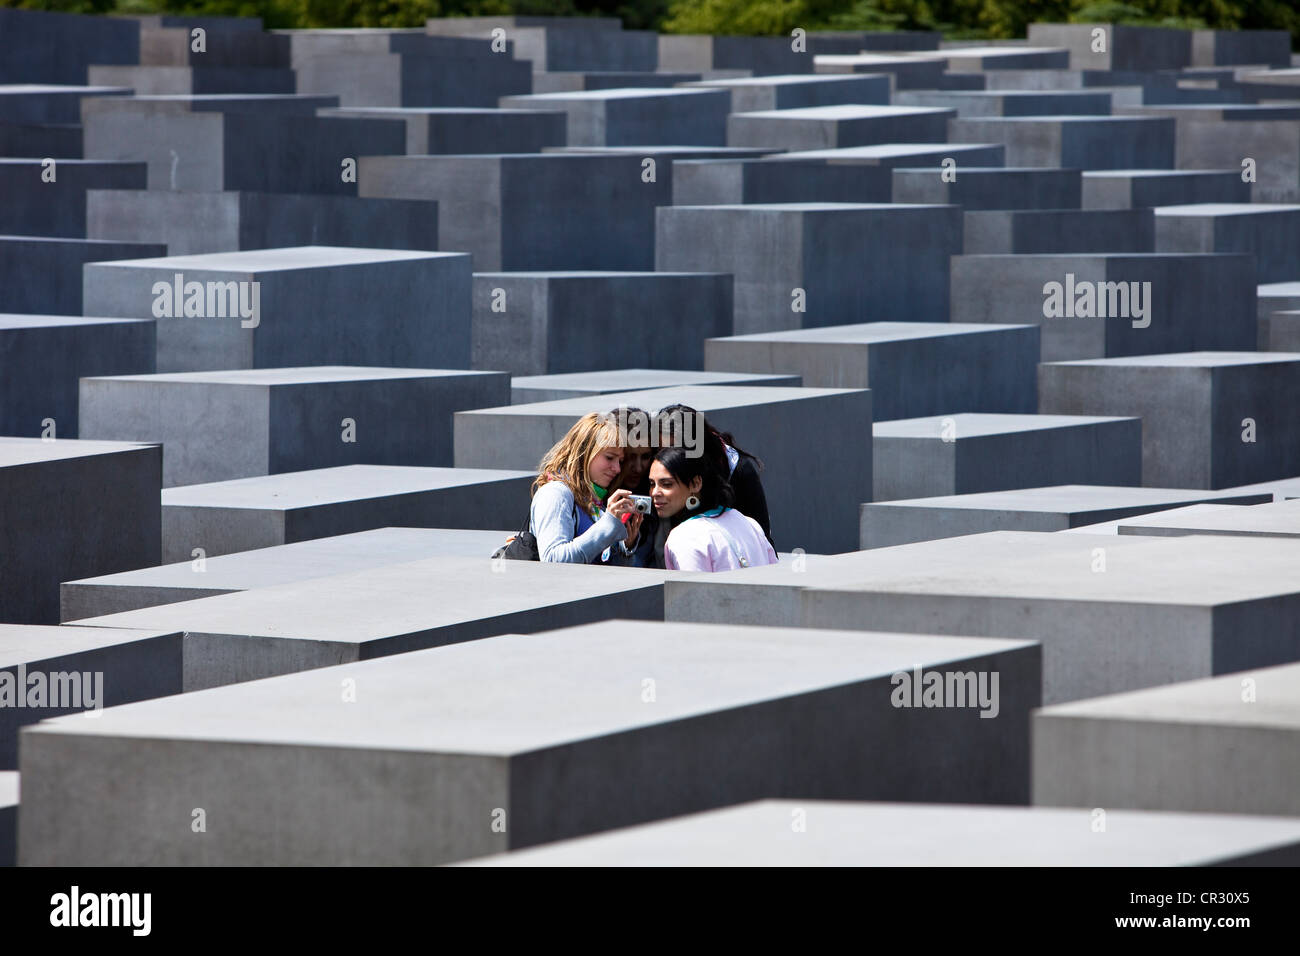 Germany, Berlin, Mitte District, Mahnmal-Holocaust, Memorial for Holocaust victims by the architect Peter Eisenmann Stock Photo